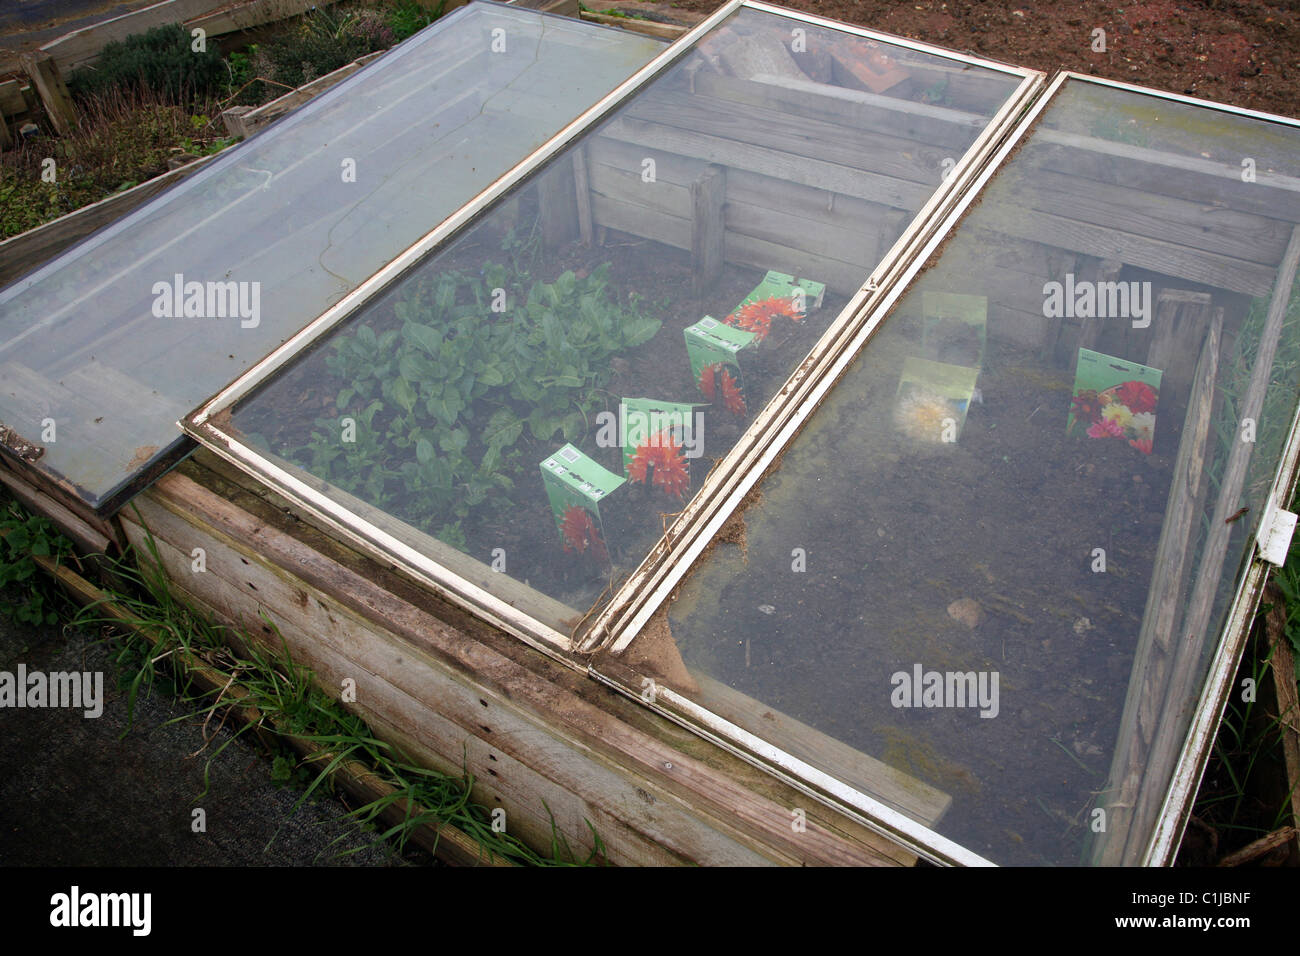 Glass cold frame seeds flowers planted Stock Photo